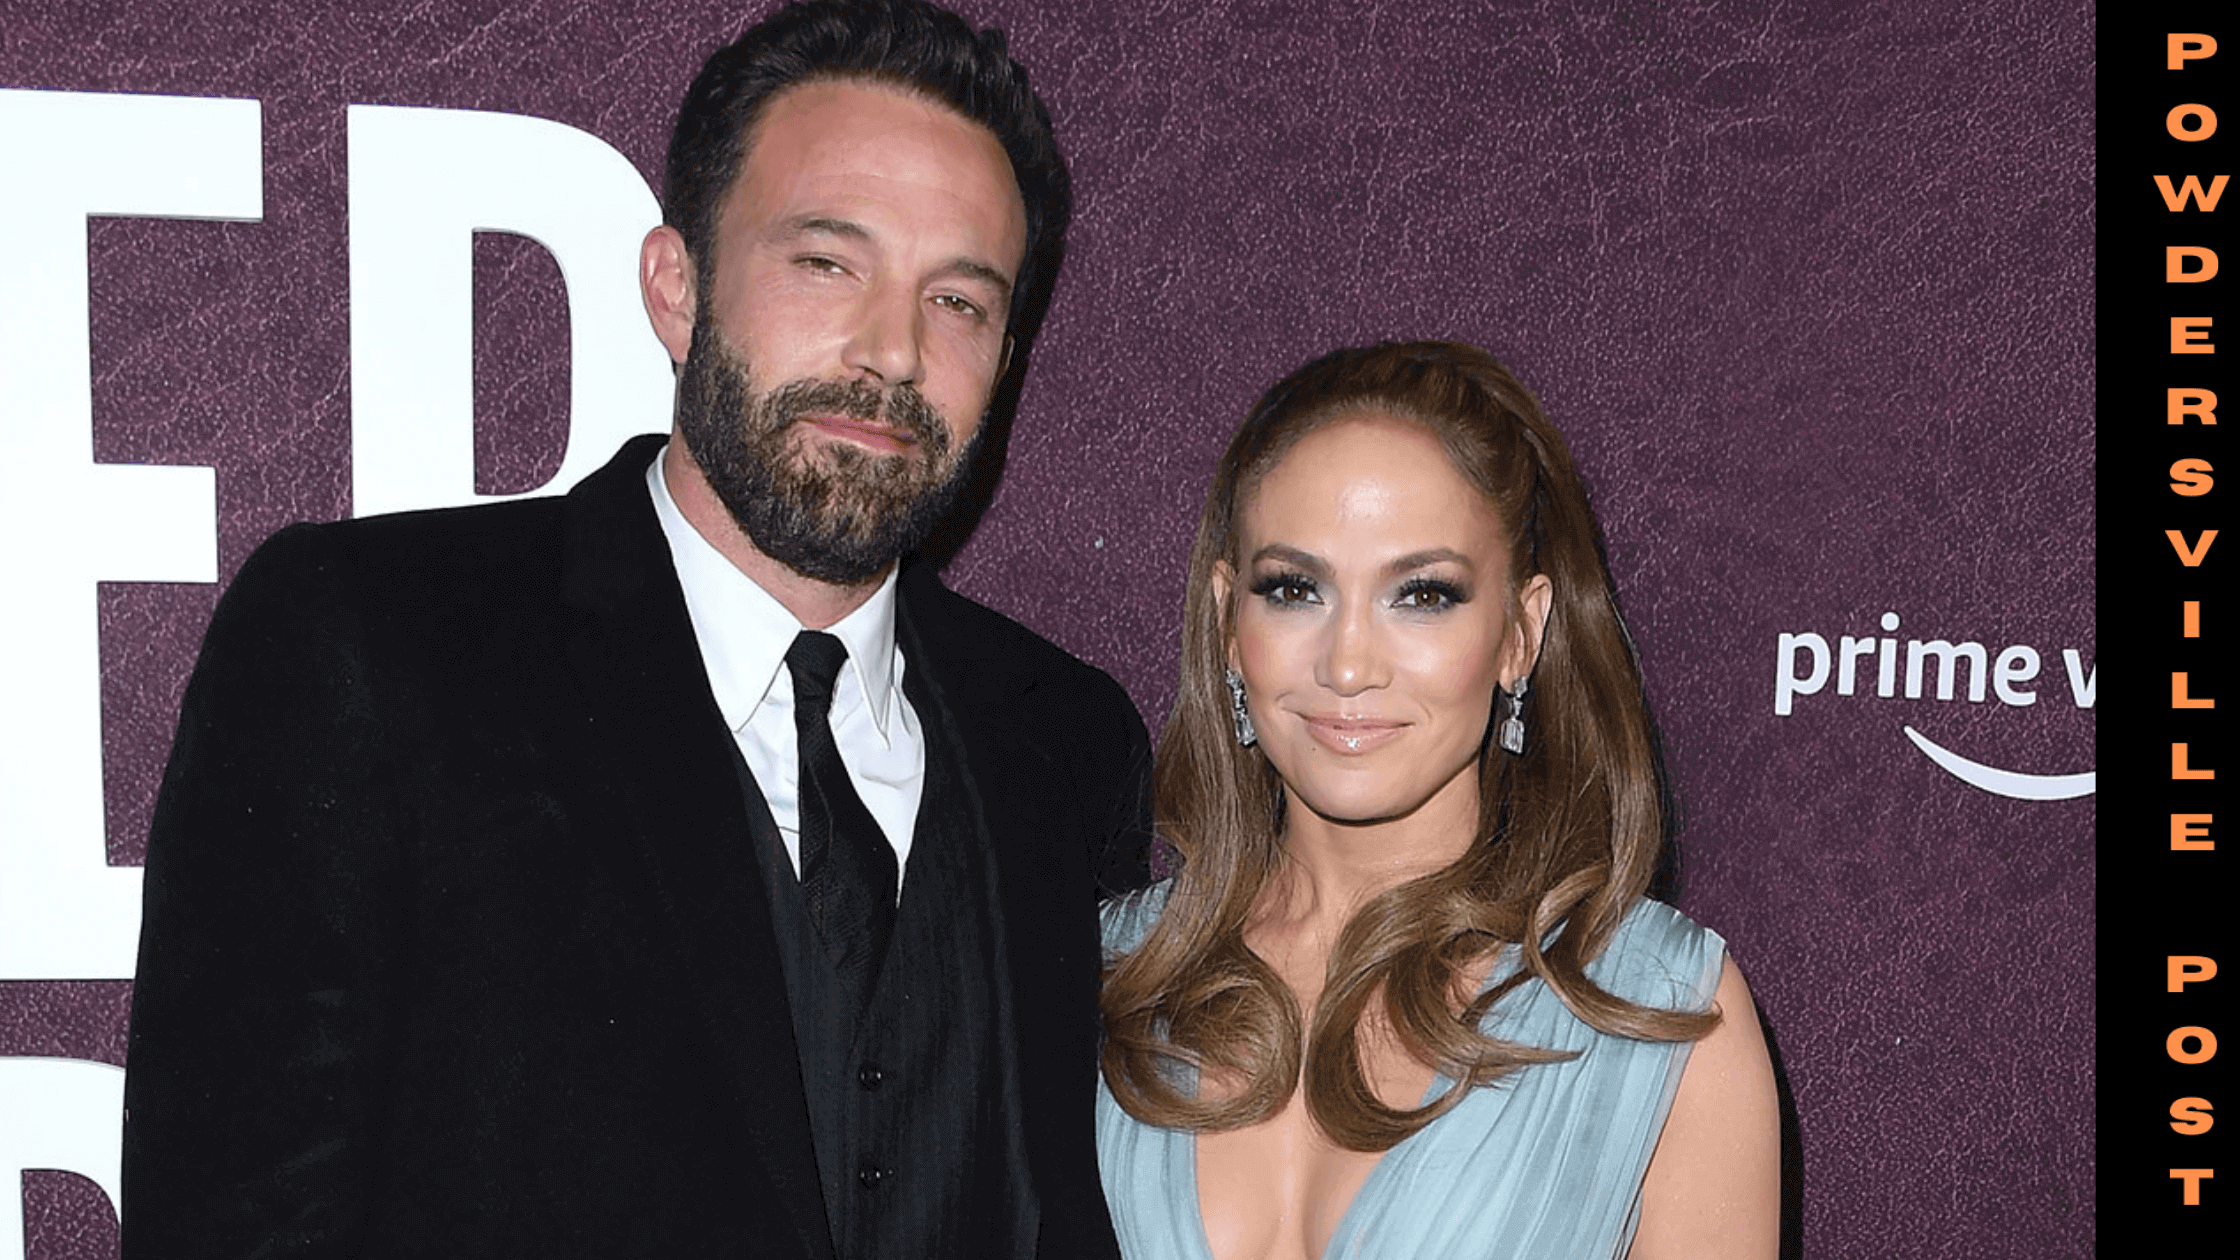 Jennifer Lopez And Ben Affleck Tour Their Bel-Air Mansion For The First Time